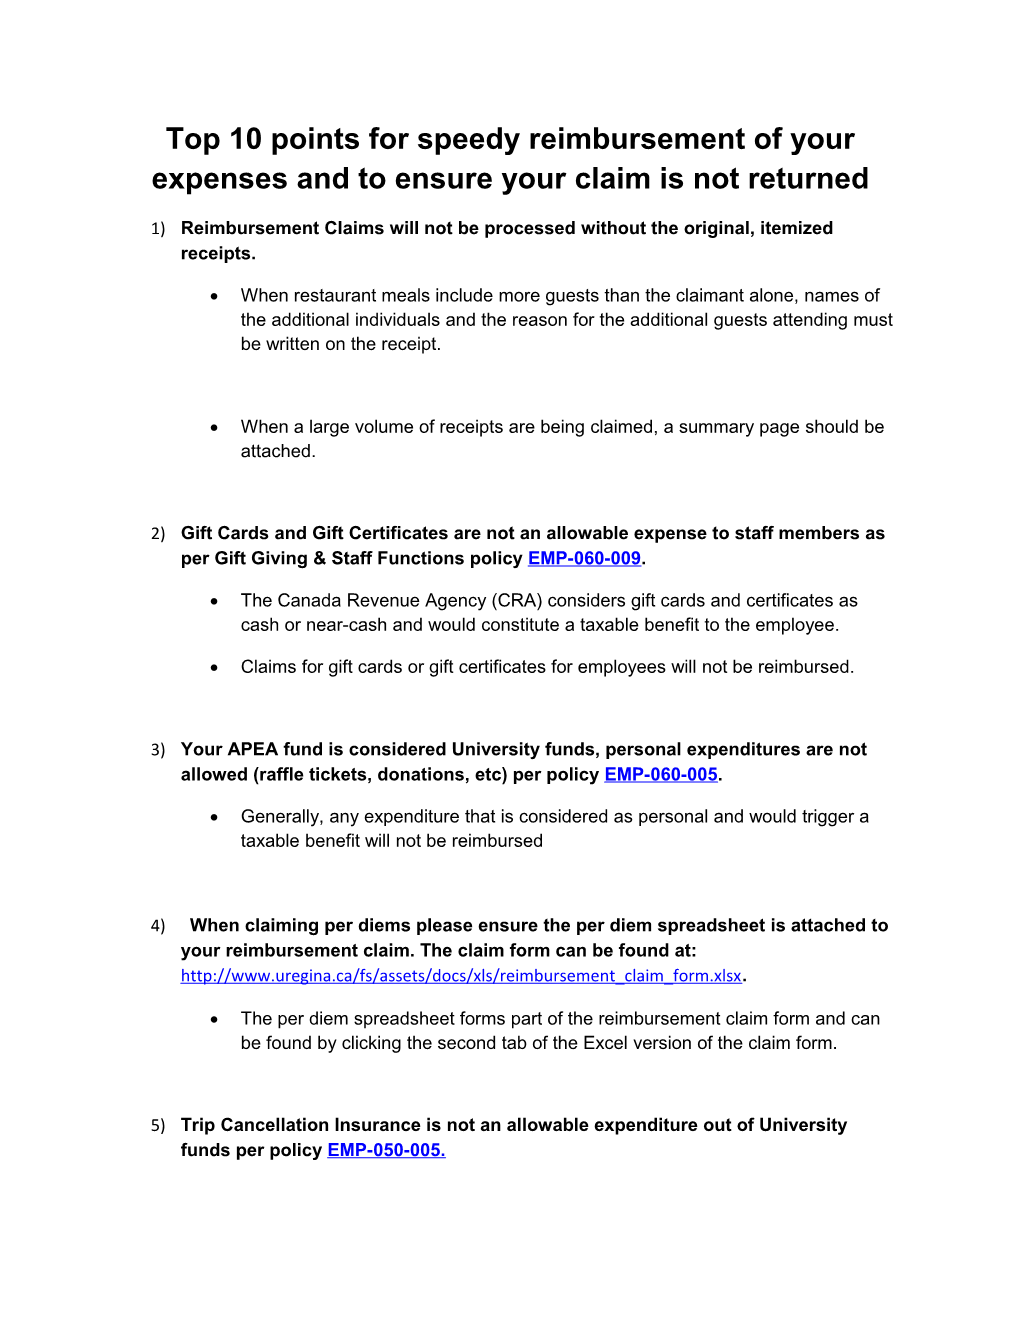 Top 10 Points for Speedy Reimbursement of Your Expenses and to Ensure Your Claim Is Not